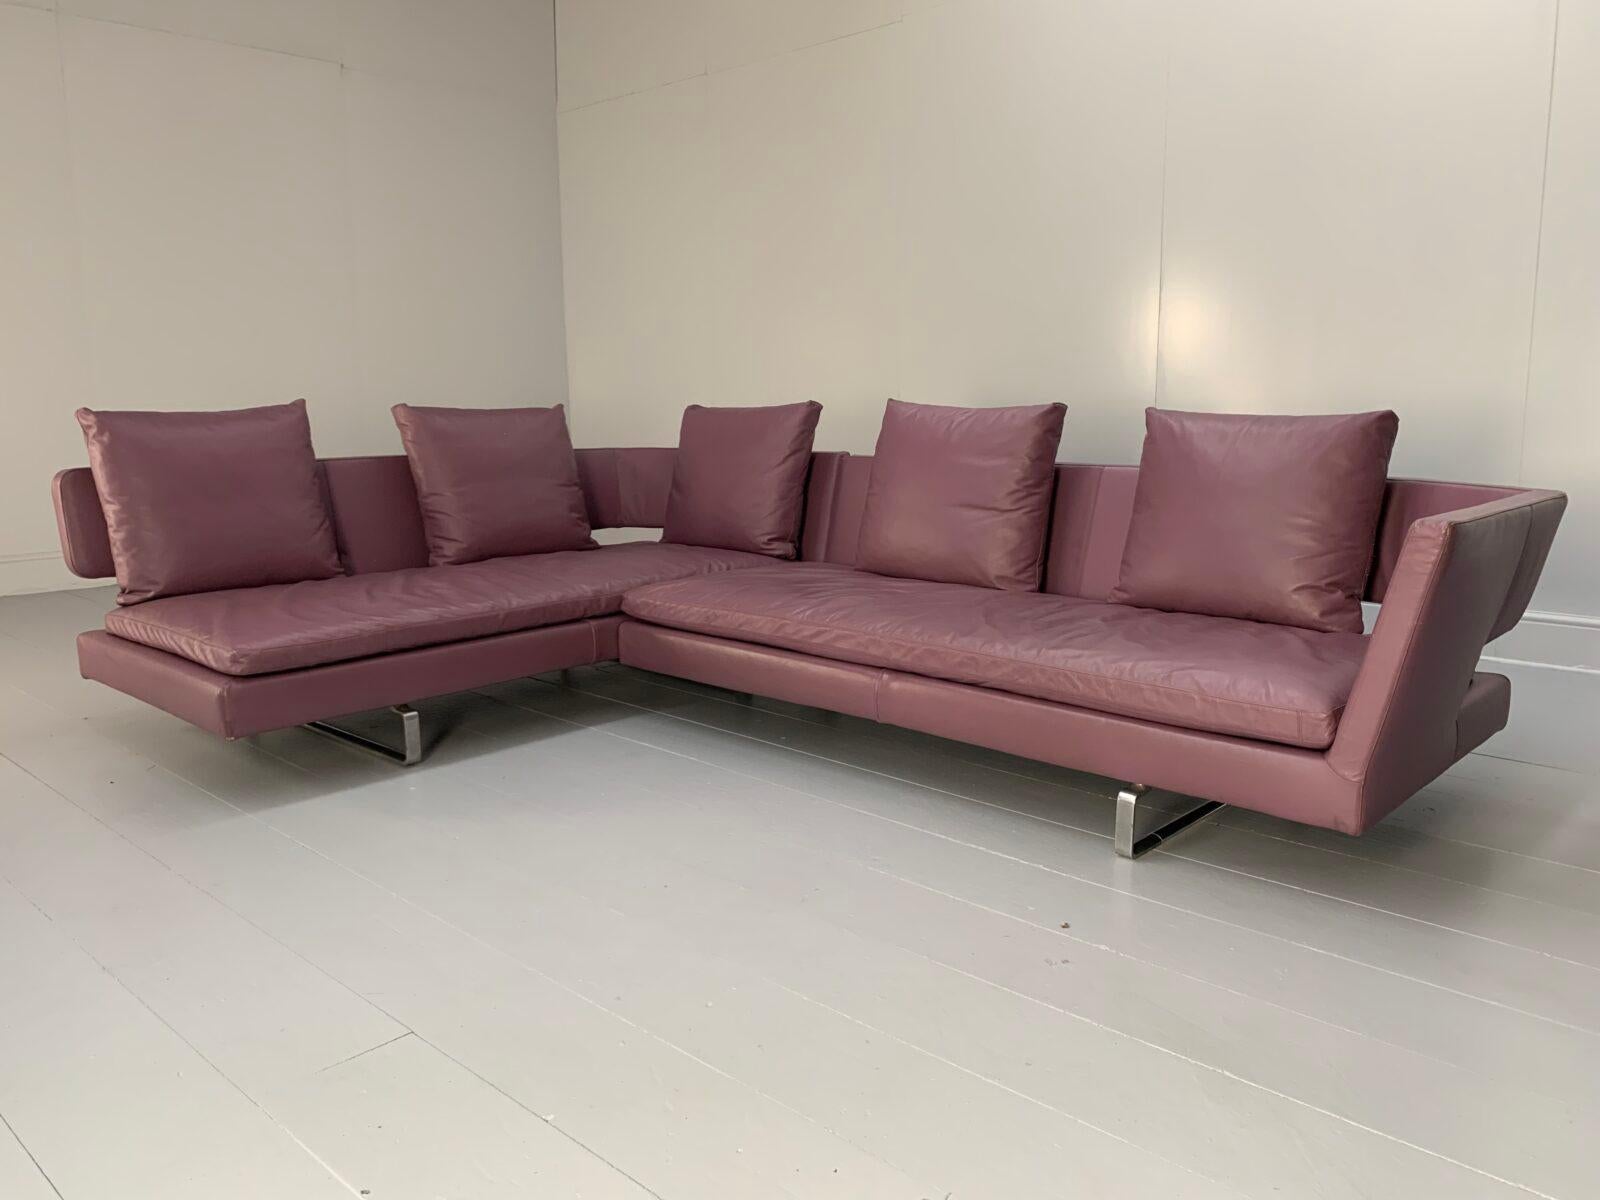 On offer on this occasion is quite a thing, it being a sublime, rare “Arne” L-Shape 6-Seat Sofa from the world renown Italian furniture house of B&B Italia.
As you will no doubt be aware by your interest in this Antonia Citterio masterpiece, B&B